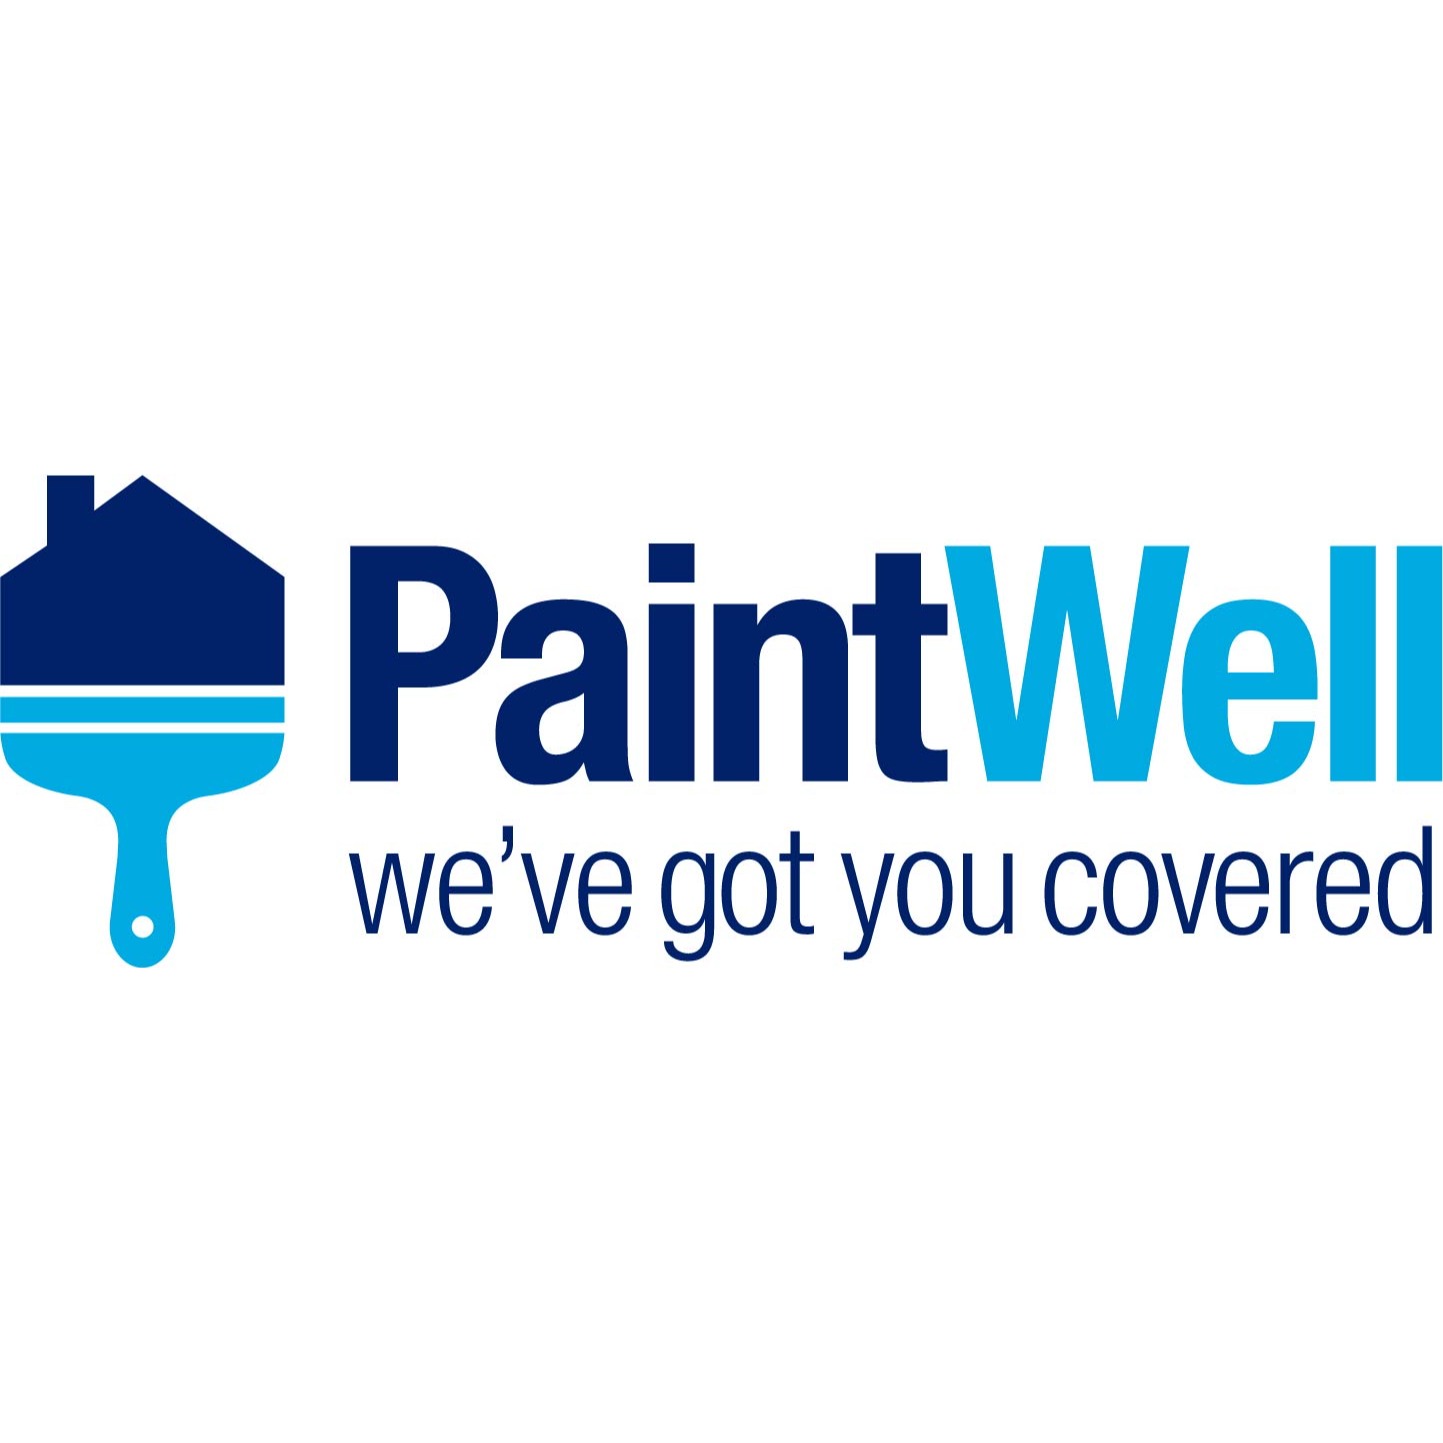 PaintWell, we've got you covered PaintWell Norwich Norwich 01603 628973